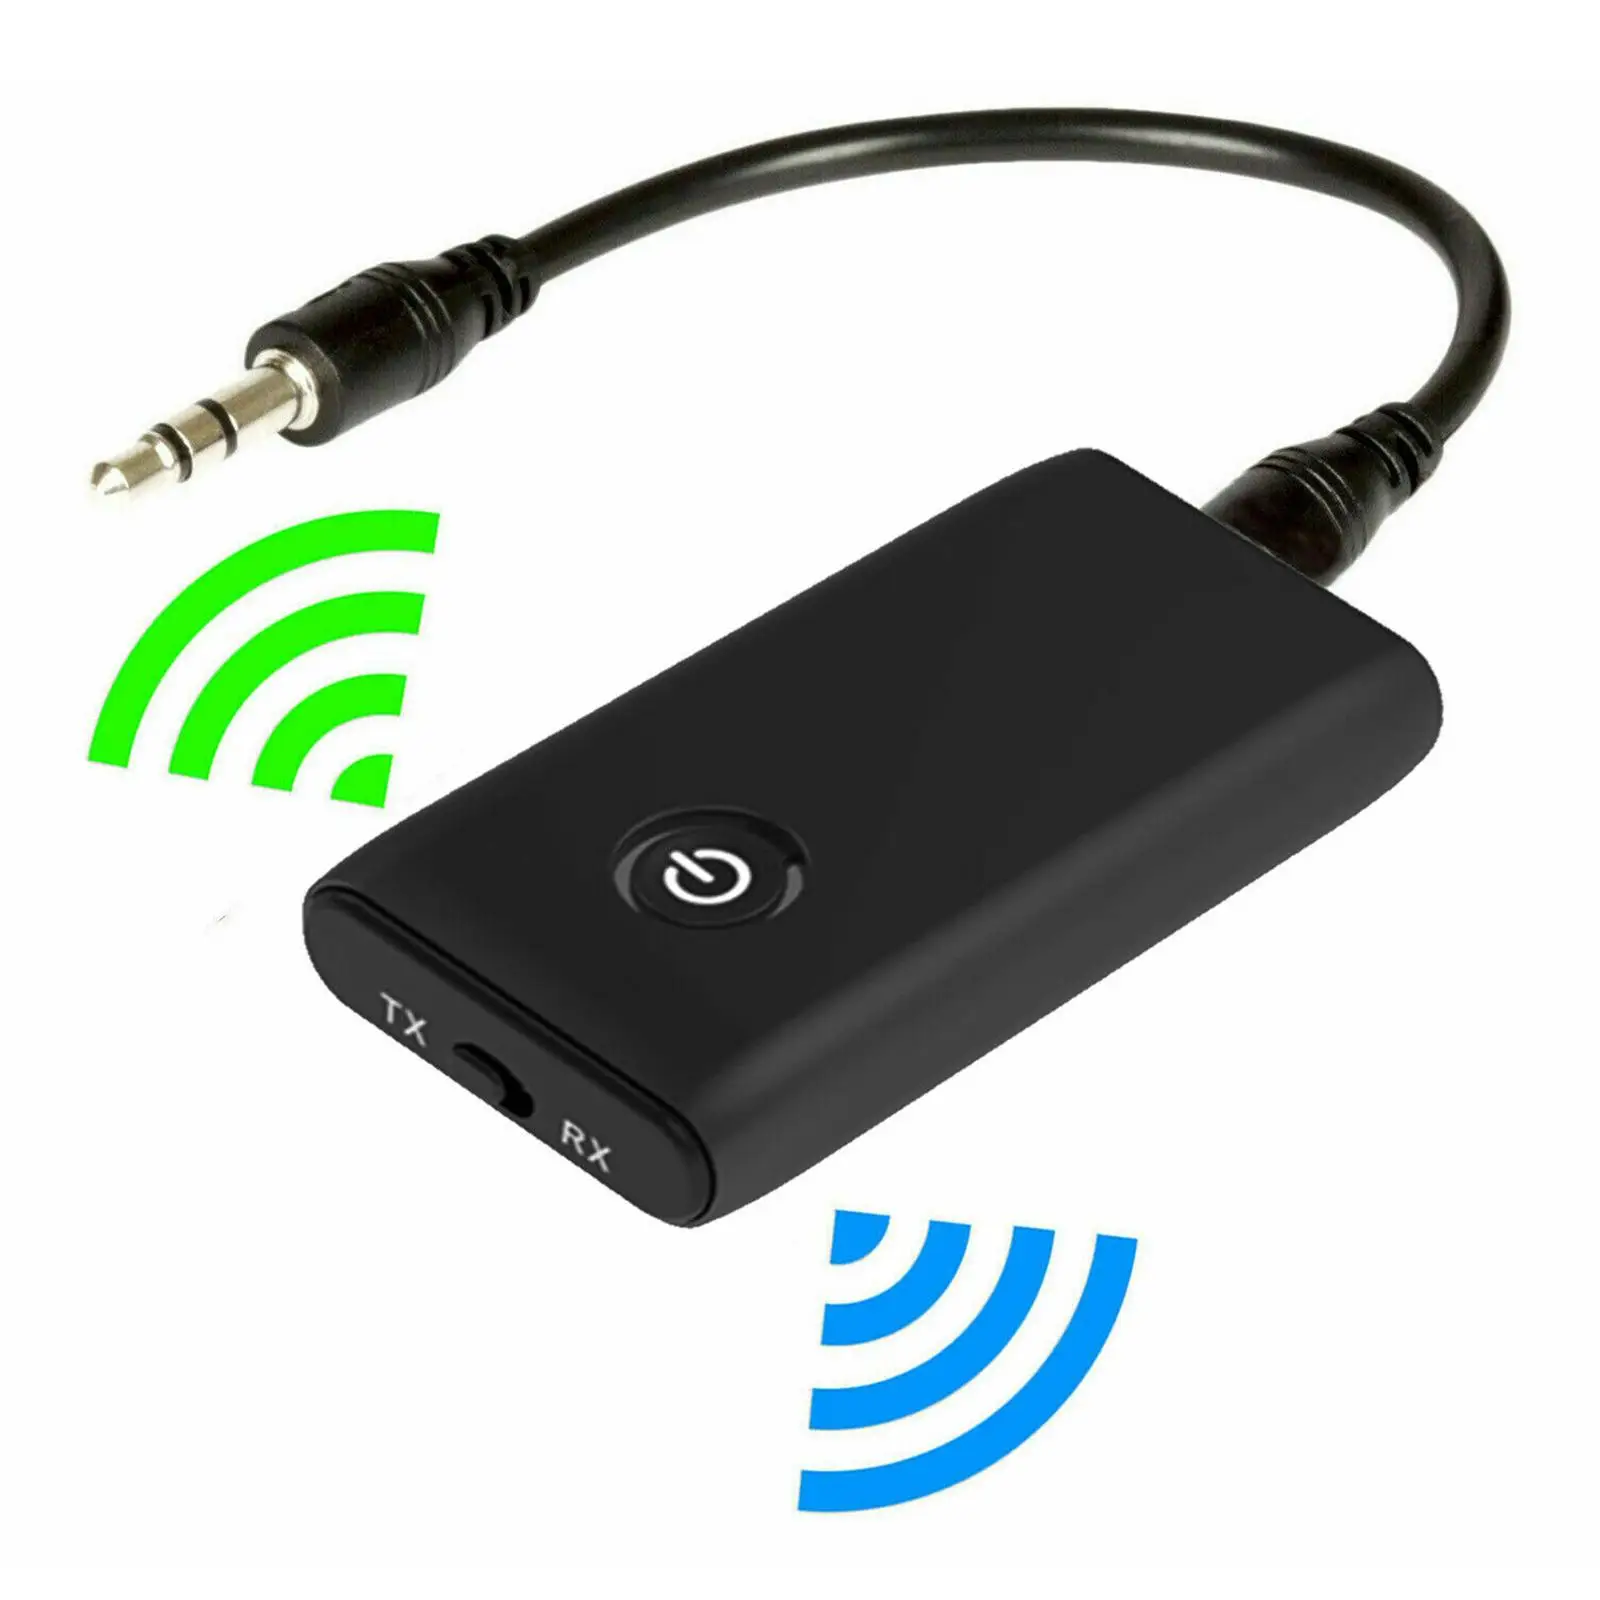 Receiver Transmitter Adapter 3.5mm Jack Handsfree Stable HiFi Music Audio Adapter for Headset Home Stereo PC Speaker TV